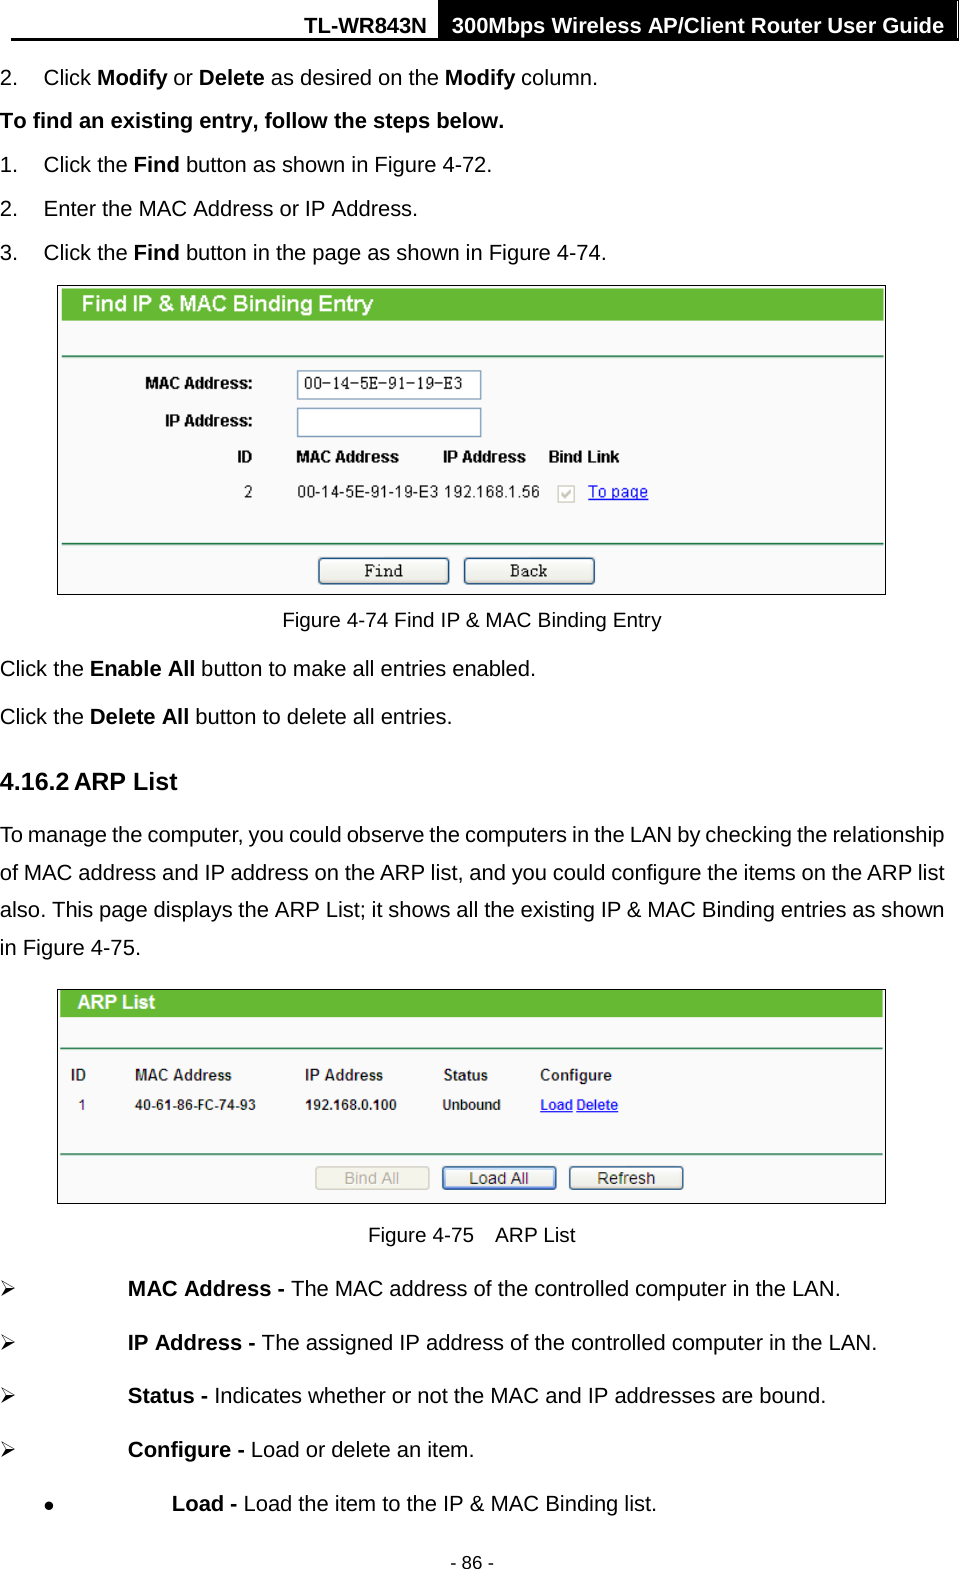 TL-WR843N 300Mbps Wireless AP/Client Router User Guide - 86 - 2. Click Modify or Delete as desired on the Modify column.To find an existing entry, follow the steps below. 1. Click the Find button as shown in Figure 4-72.2. Enter the MAC Address or IP Address.3. Click the Find button in the page as shown in Figure 4-74.Figure 4-74 Find IP &amp; MAC Binding Entry Click the Enable All button to make all entries enabled. Click the Delete All button to delete all entries. 4.16.2 ARP List To manage the computer, you could observe the computers in the LAN by checking the relationship of MAC address and IP address on the ARP list, and you could configure the items on the ARP list also. This page displays the ARP List; it shows all the existing IP &amp; MAC Binding entries as shown in Figure 4-75.   Figure 4-75  ARP List  MAC Address - The MAC address of the controlled computer in the LAN.    IP Address - The assigned IP address of the controlled computer in the LAN.  Status - Indicates whether or not the MAC and IP addresses are bound.  Configure - Load or delete an item.    Load - Load the item to the IP &amp; MAC Binding list. 